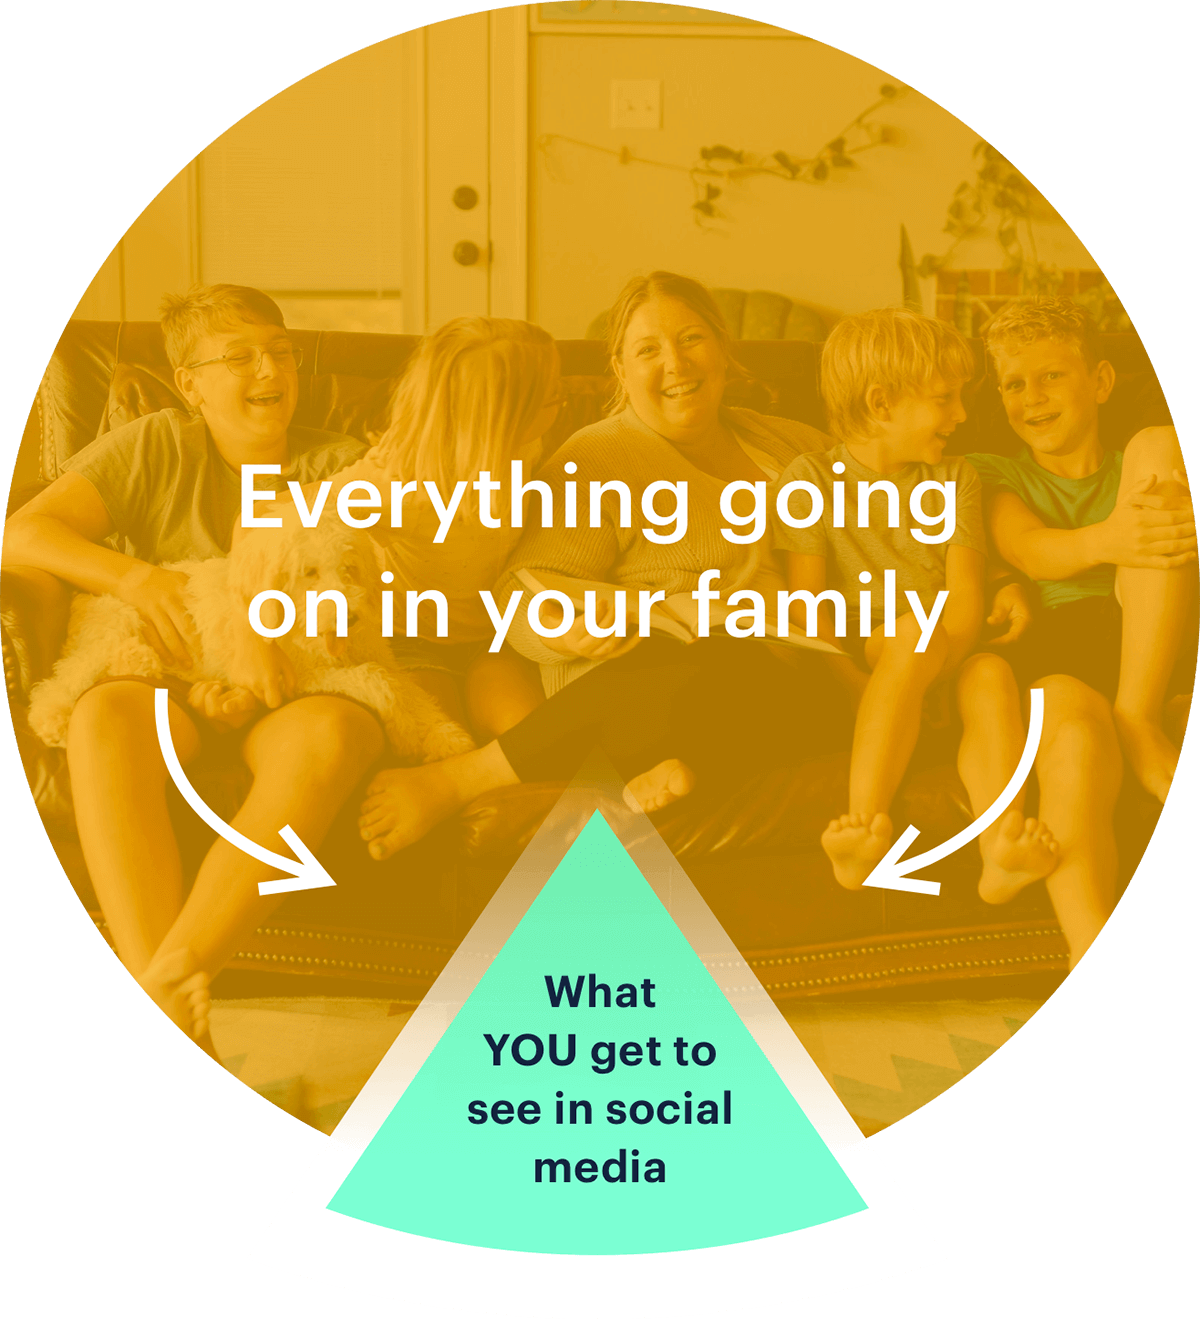 Pie chart illustrating that you only see a small part of what happens in your family